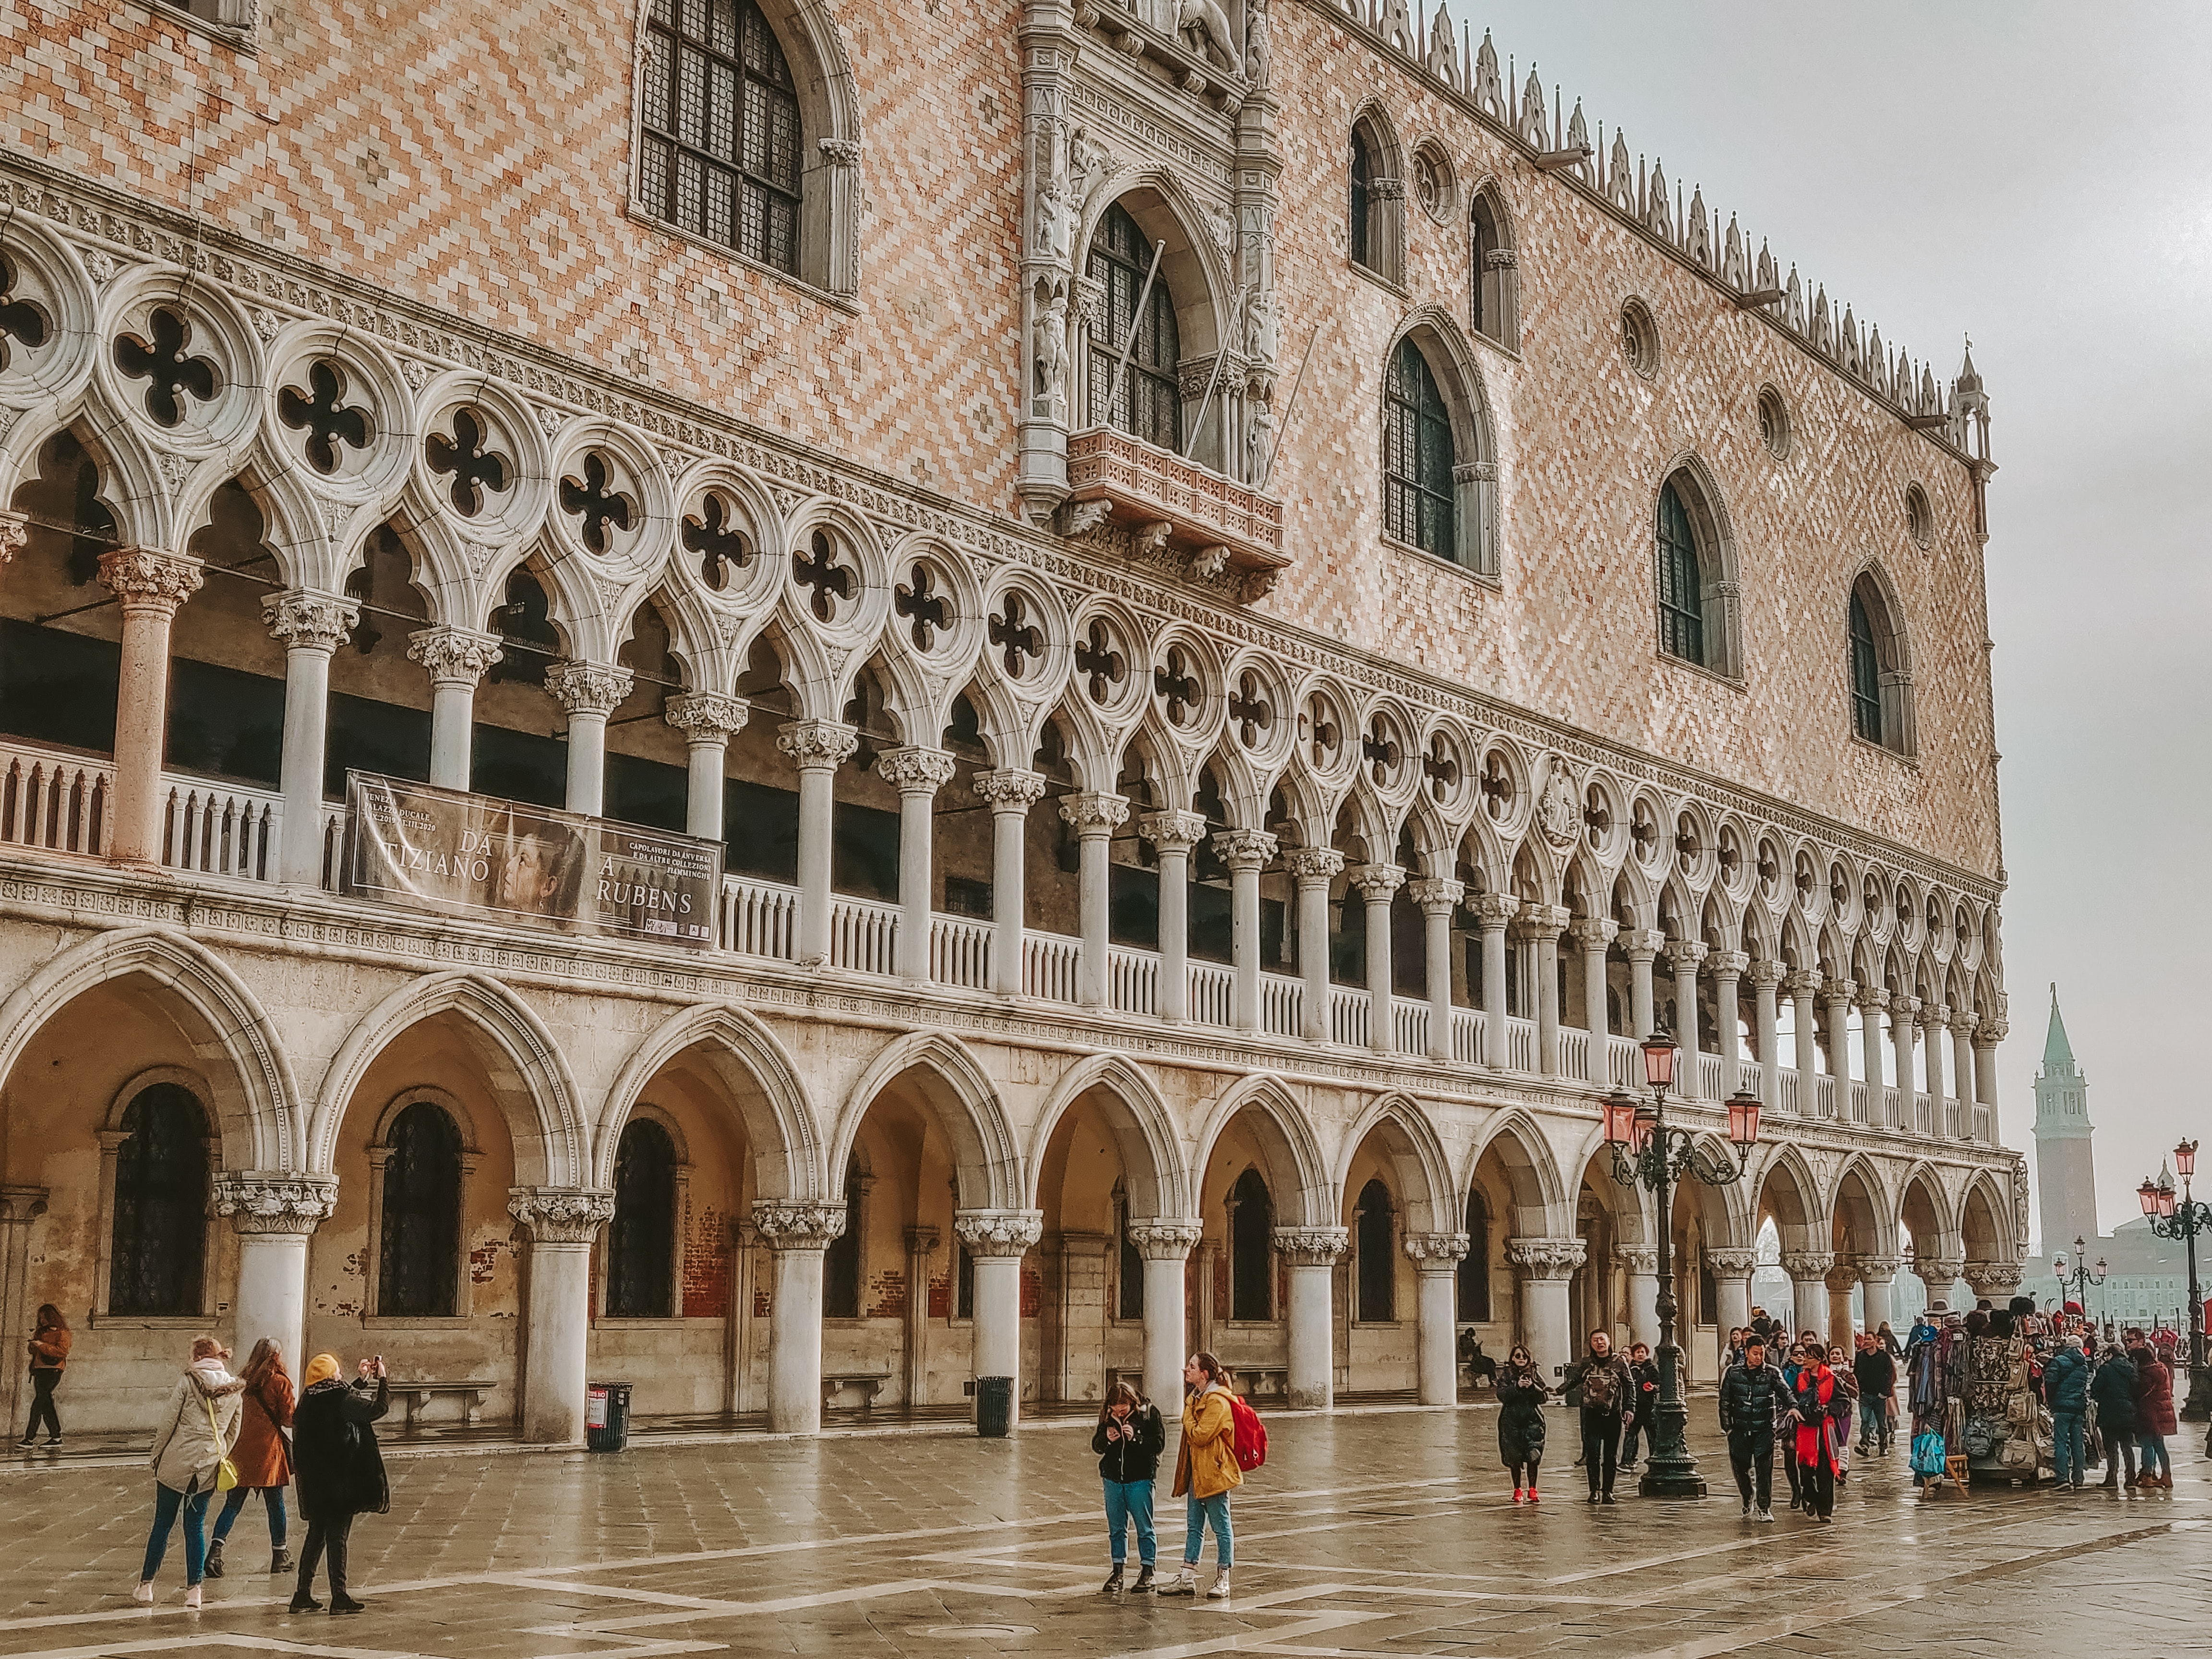 Doge's Palace in Venice, Italy